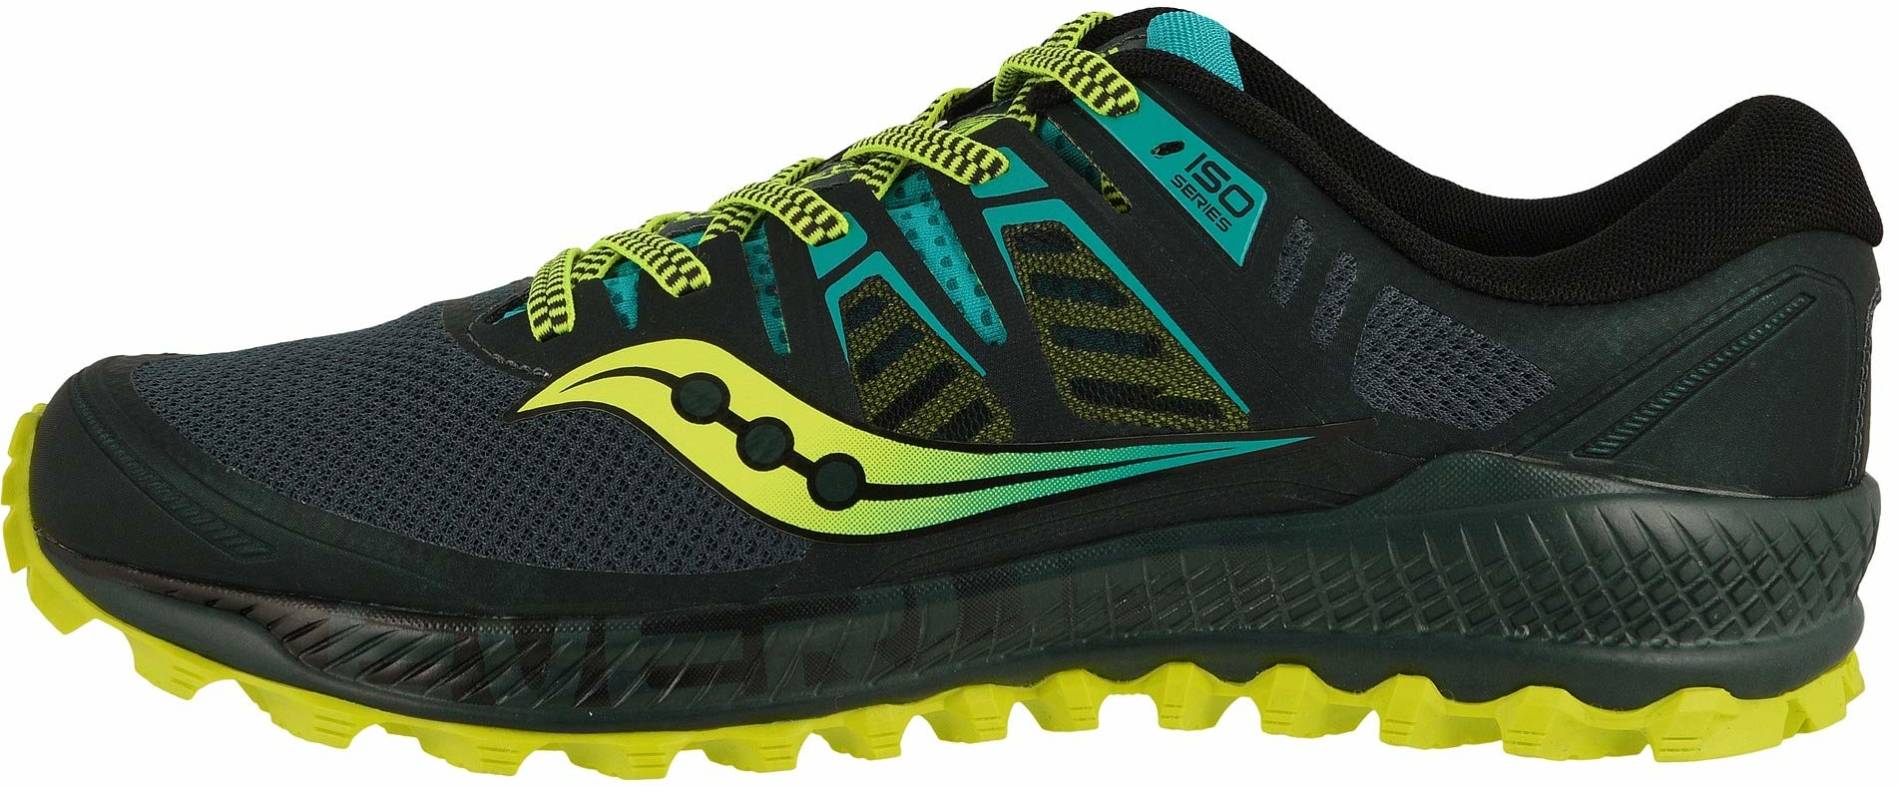 Saucony Mens S20483-2 Trail Running Shoe